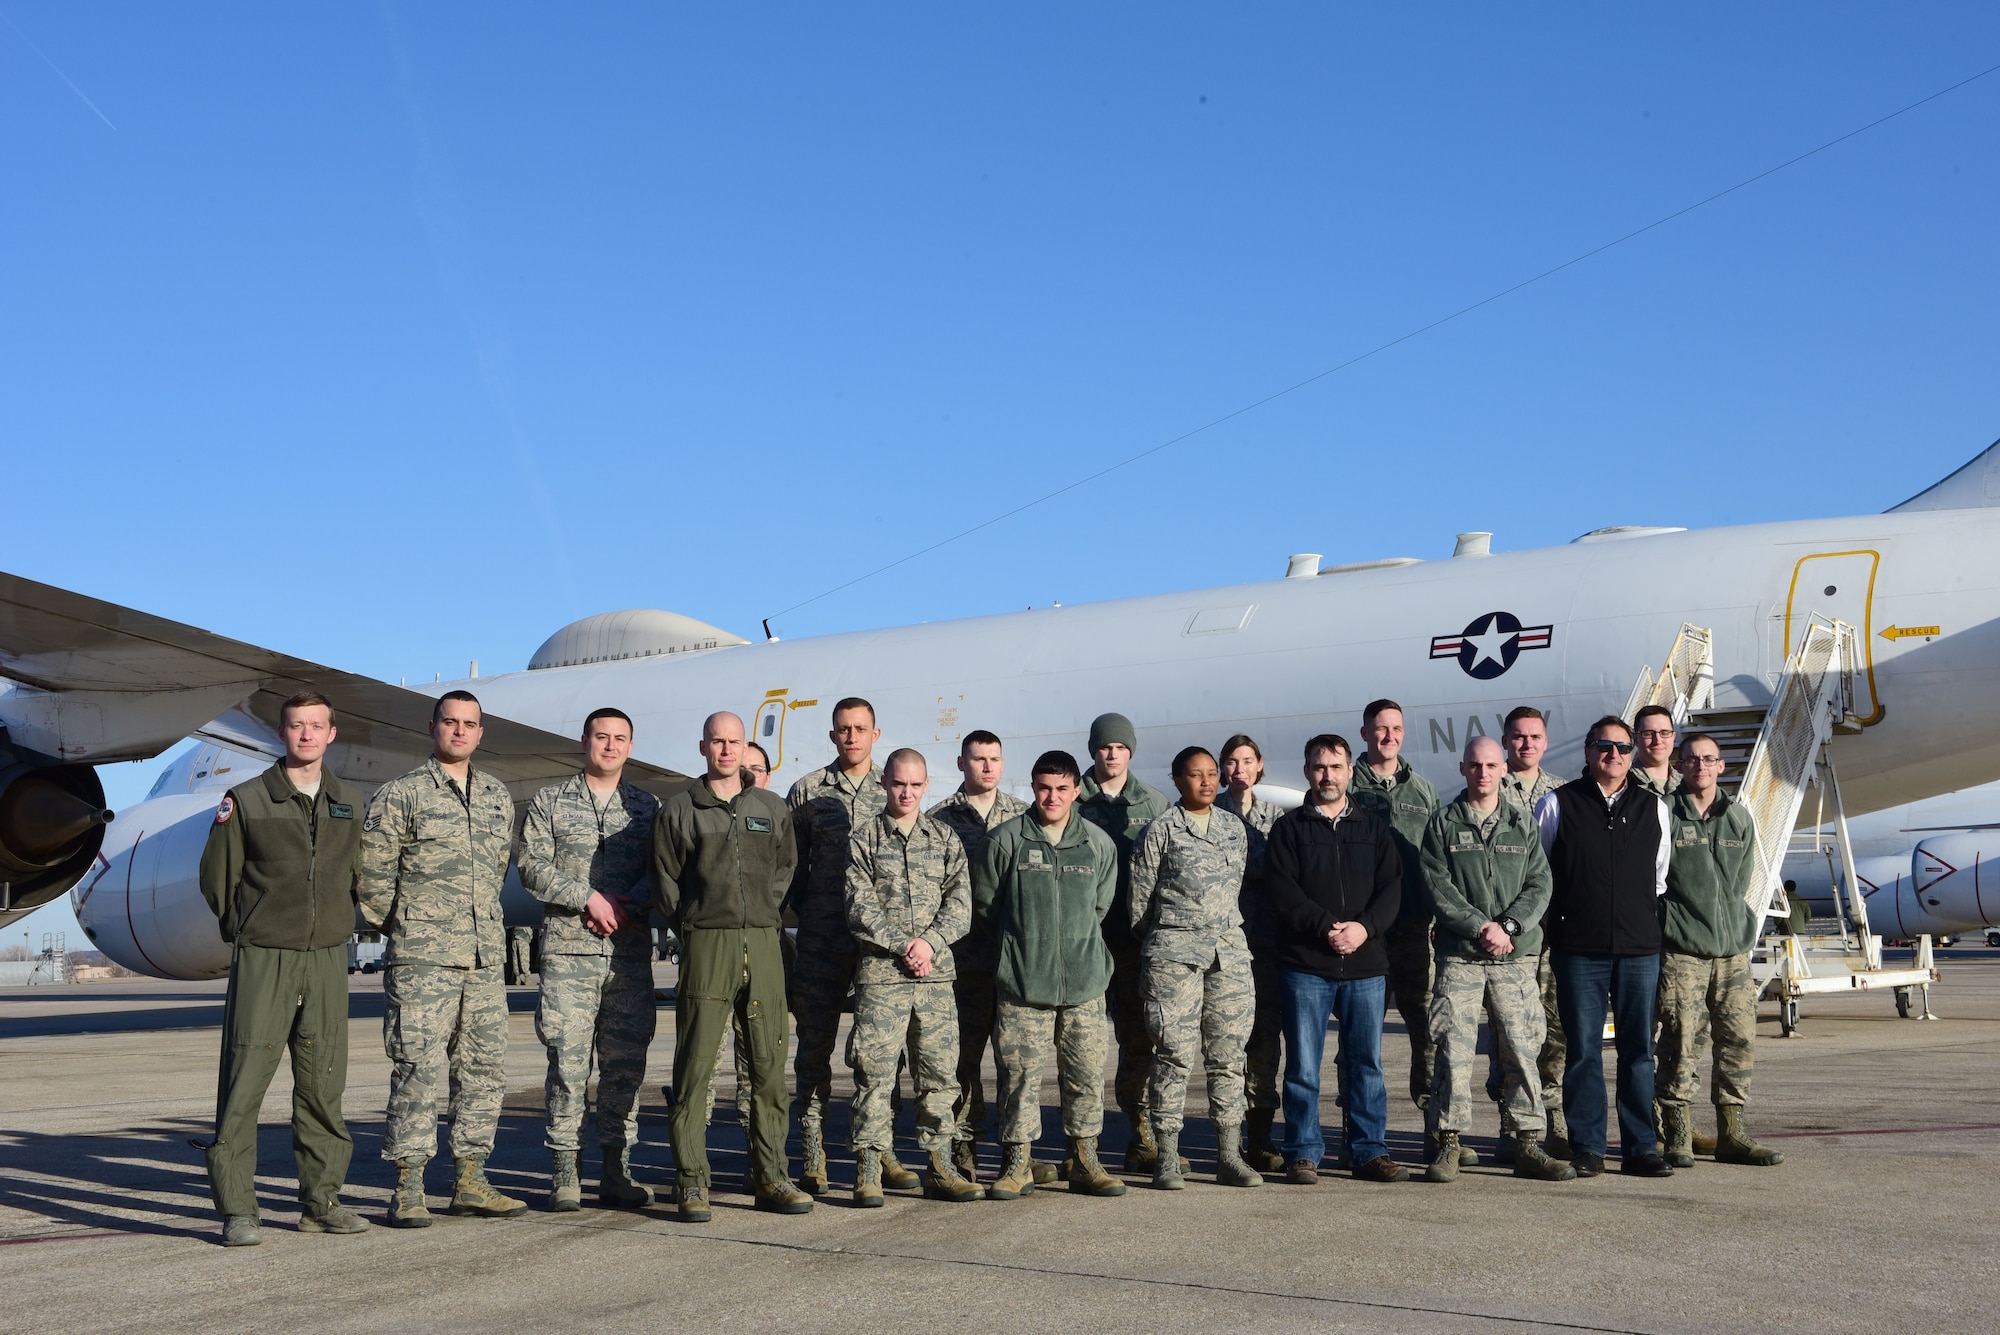 Members of the 595th Command and Control Group stand in front of an E-6B following a tour of the aircraft during the 625th Strategic Operations Squadron’s Deep Dive held at Offutt Air Force Base, Neb., Jan. 25, 2018. The Deep Dive is part of an effort by the group to give members of different squadrons insight into squadron-specific missions and an understanding of how their missions work together.